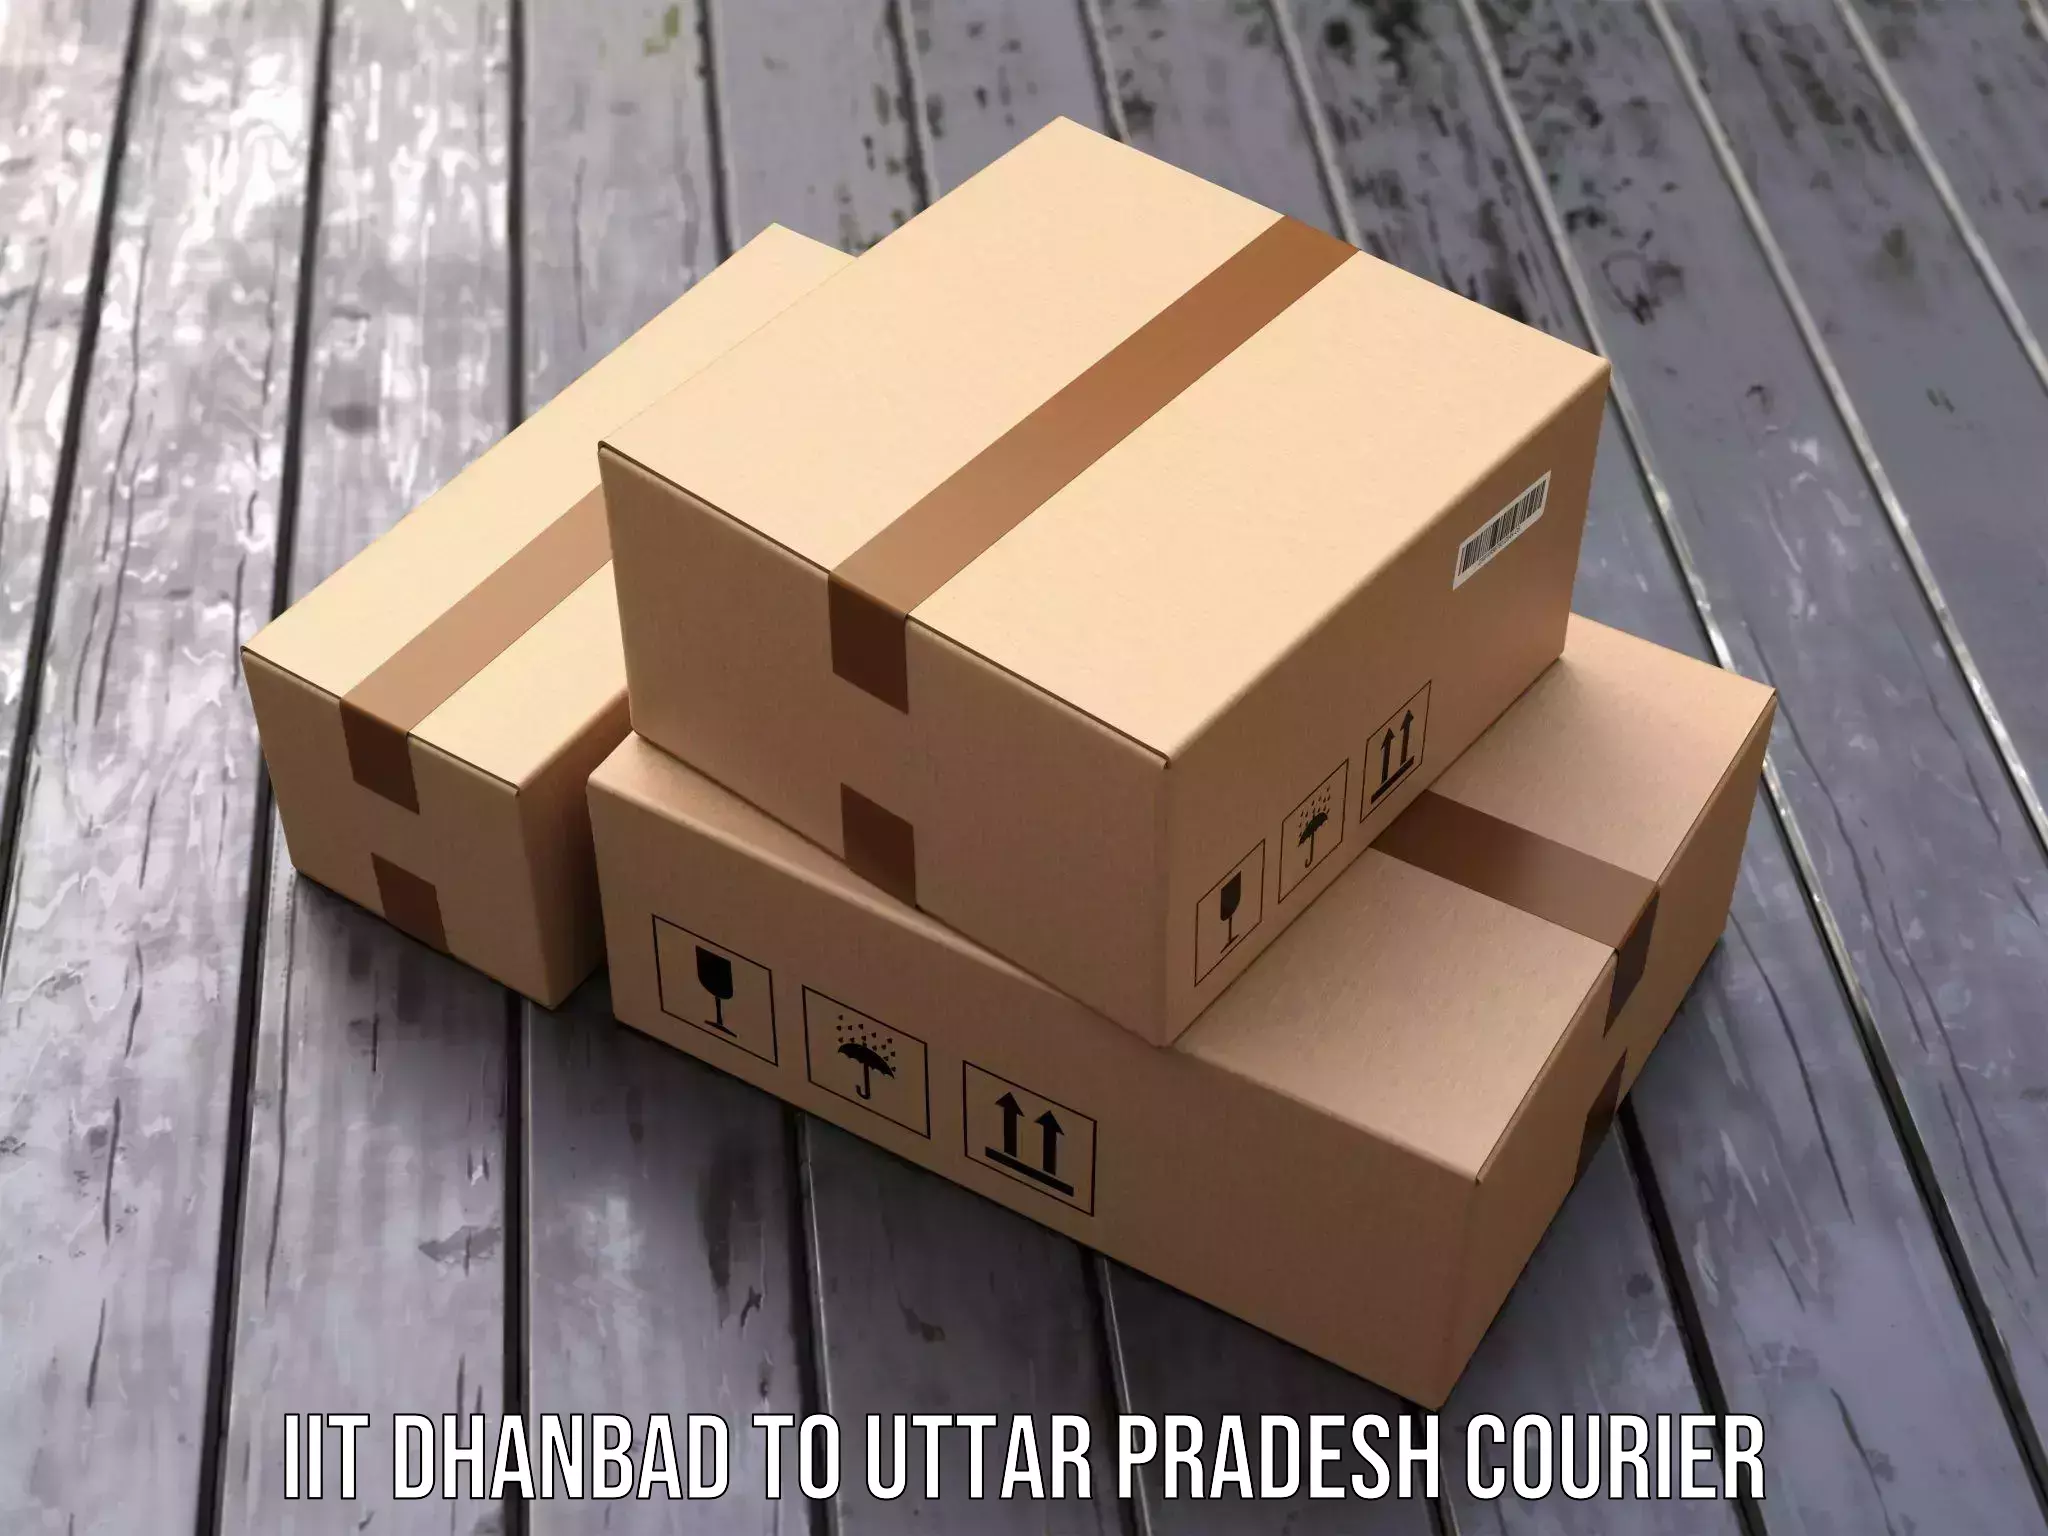 Courier service partnerships IIT Dhanbad to Cholapur